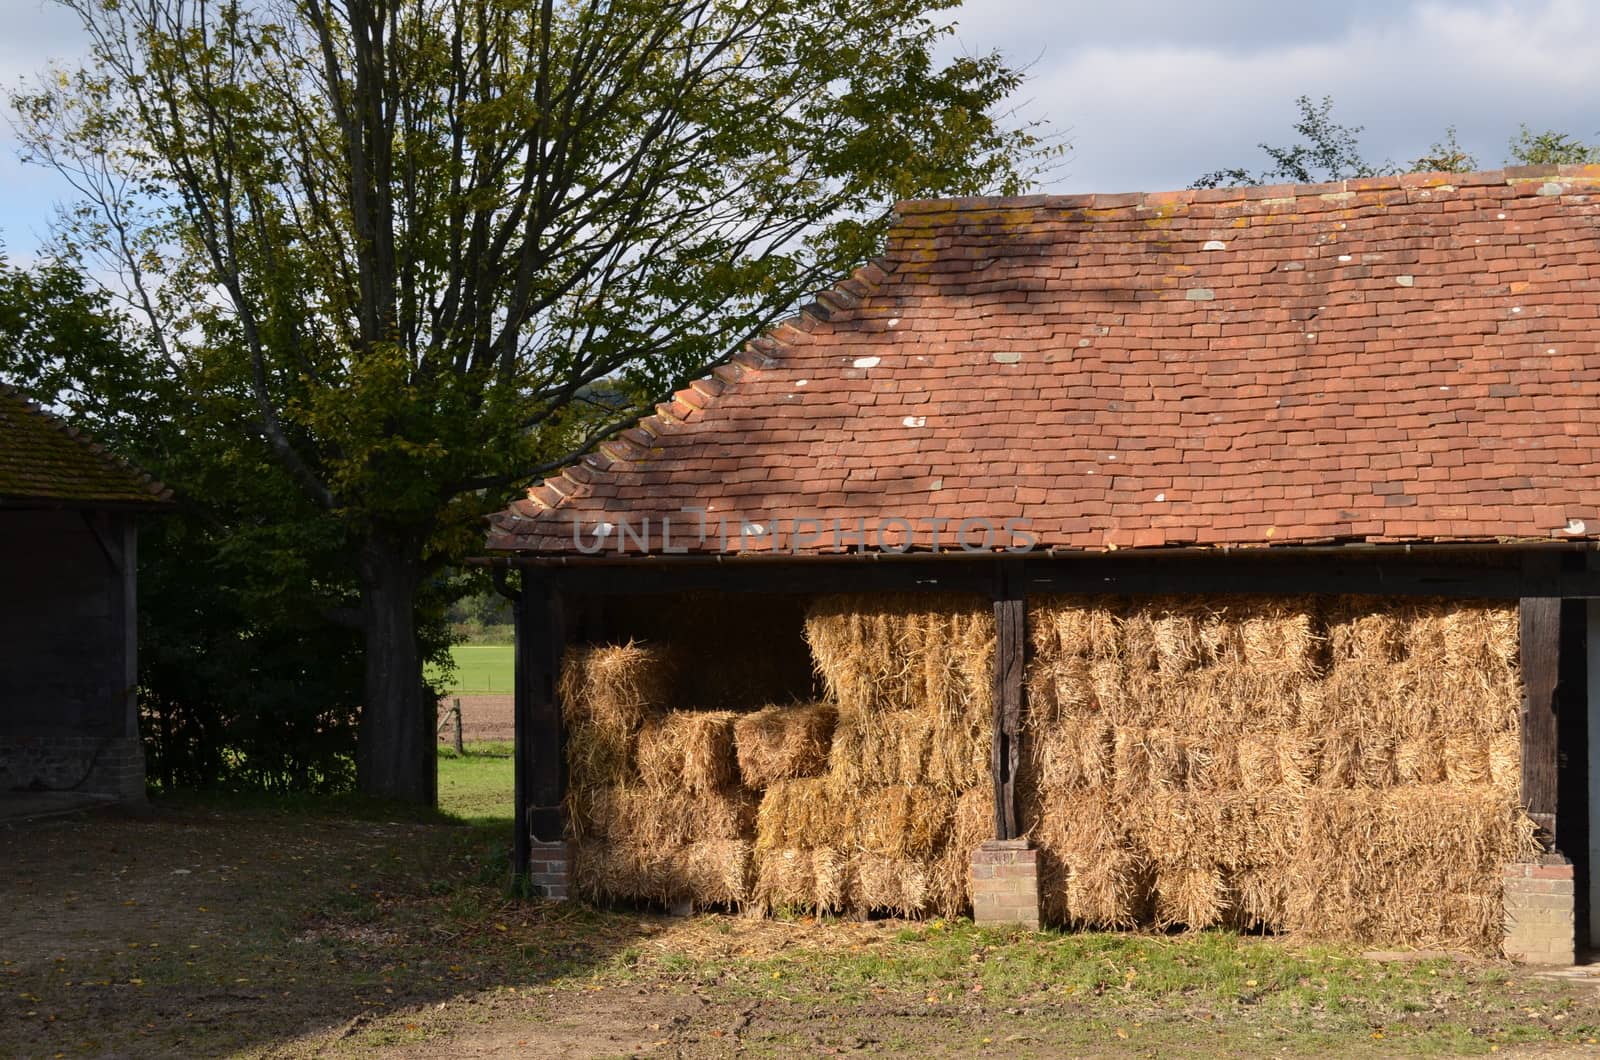 Timber framed open sided English barn stacked with hay.